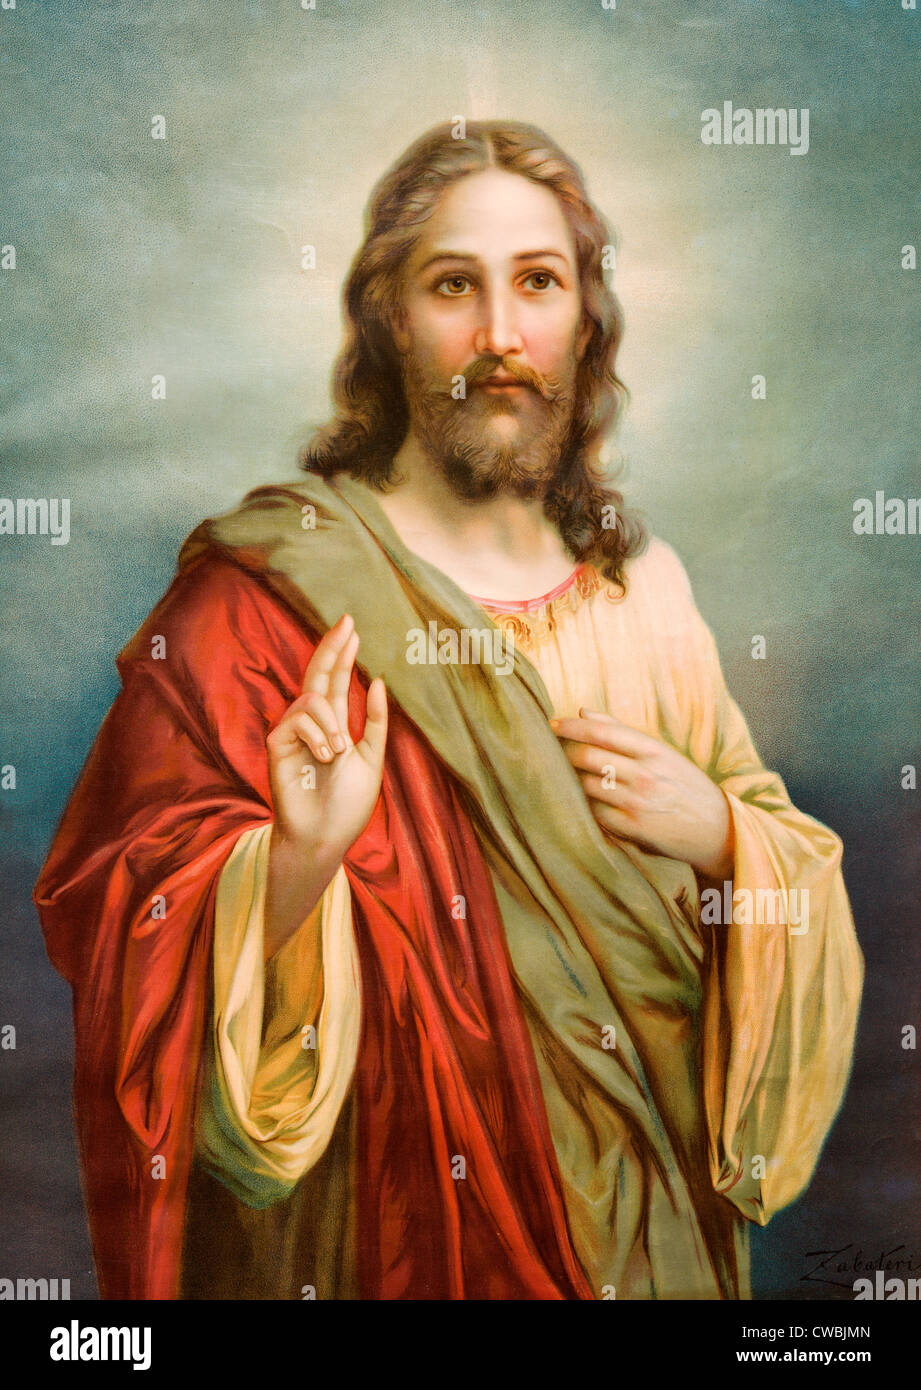 Copy of typical catholic image of Jesus Christ from Slovakia by painter Zabateri. Stock Photo